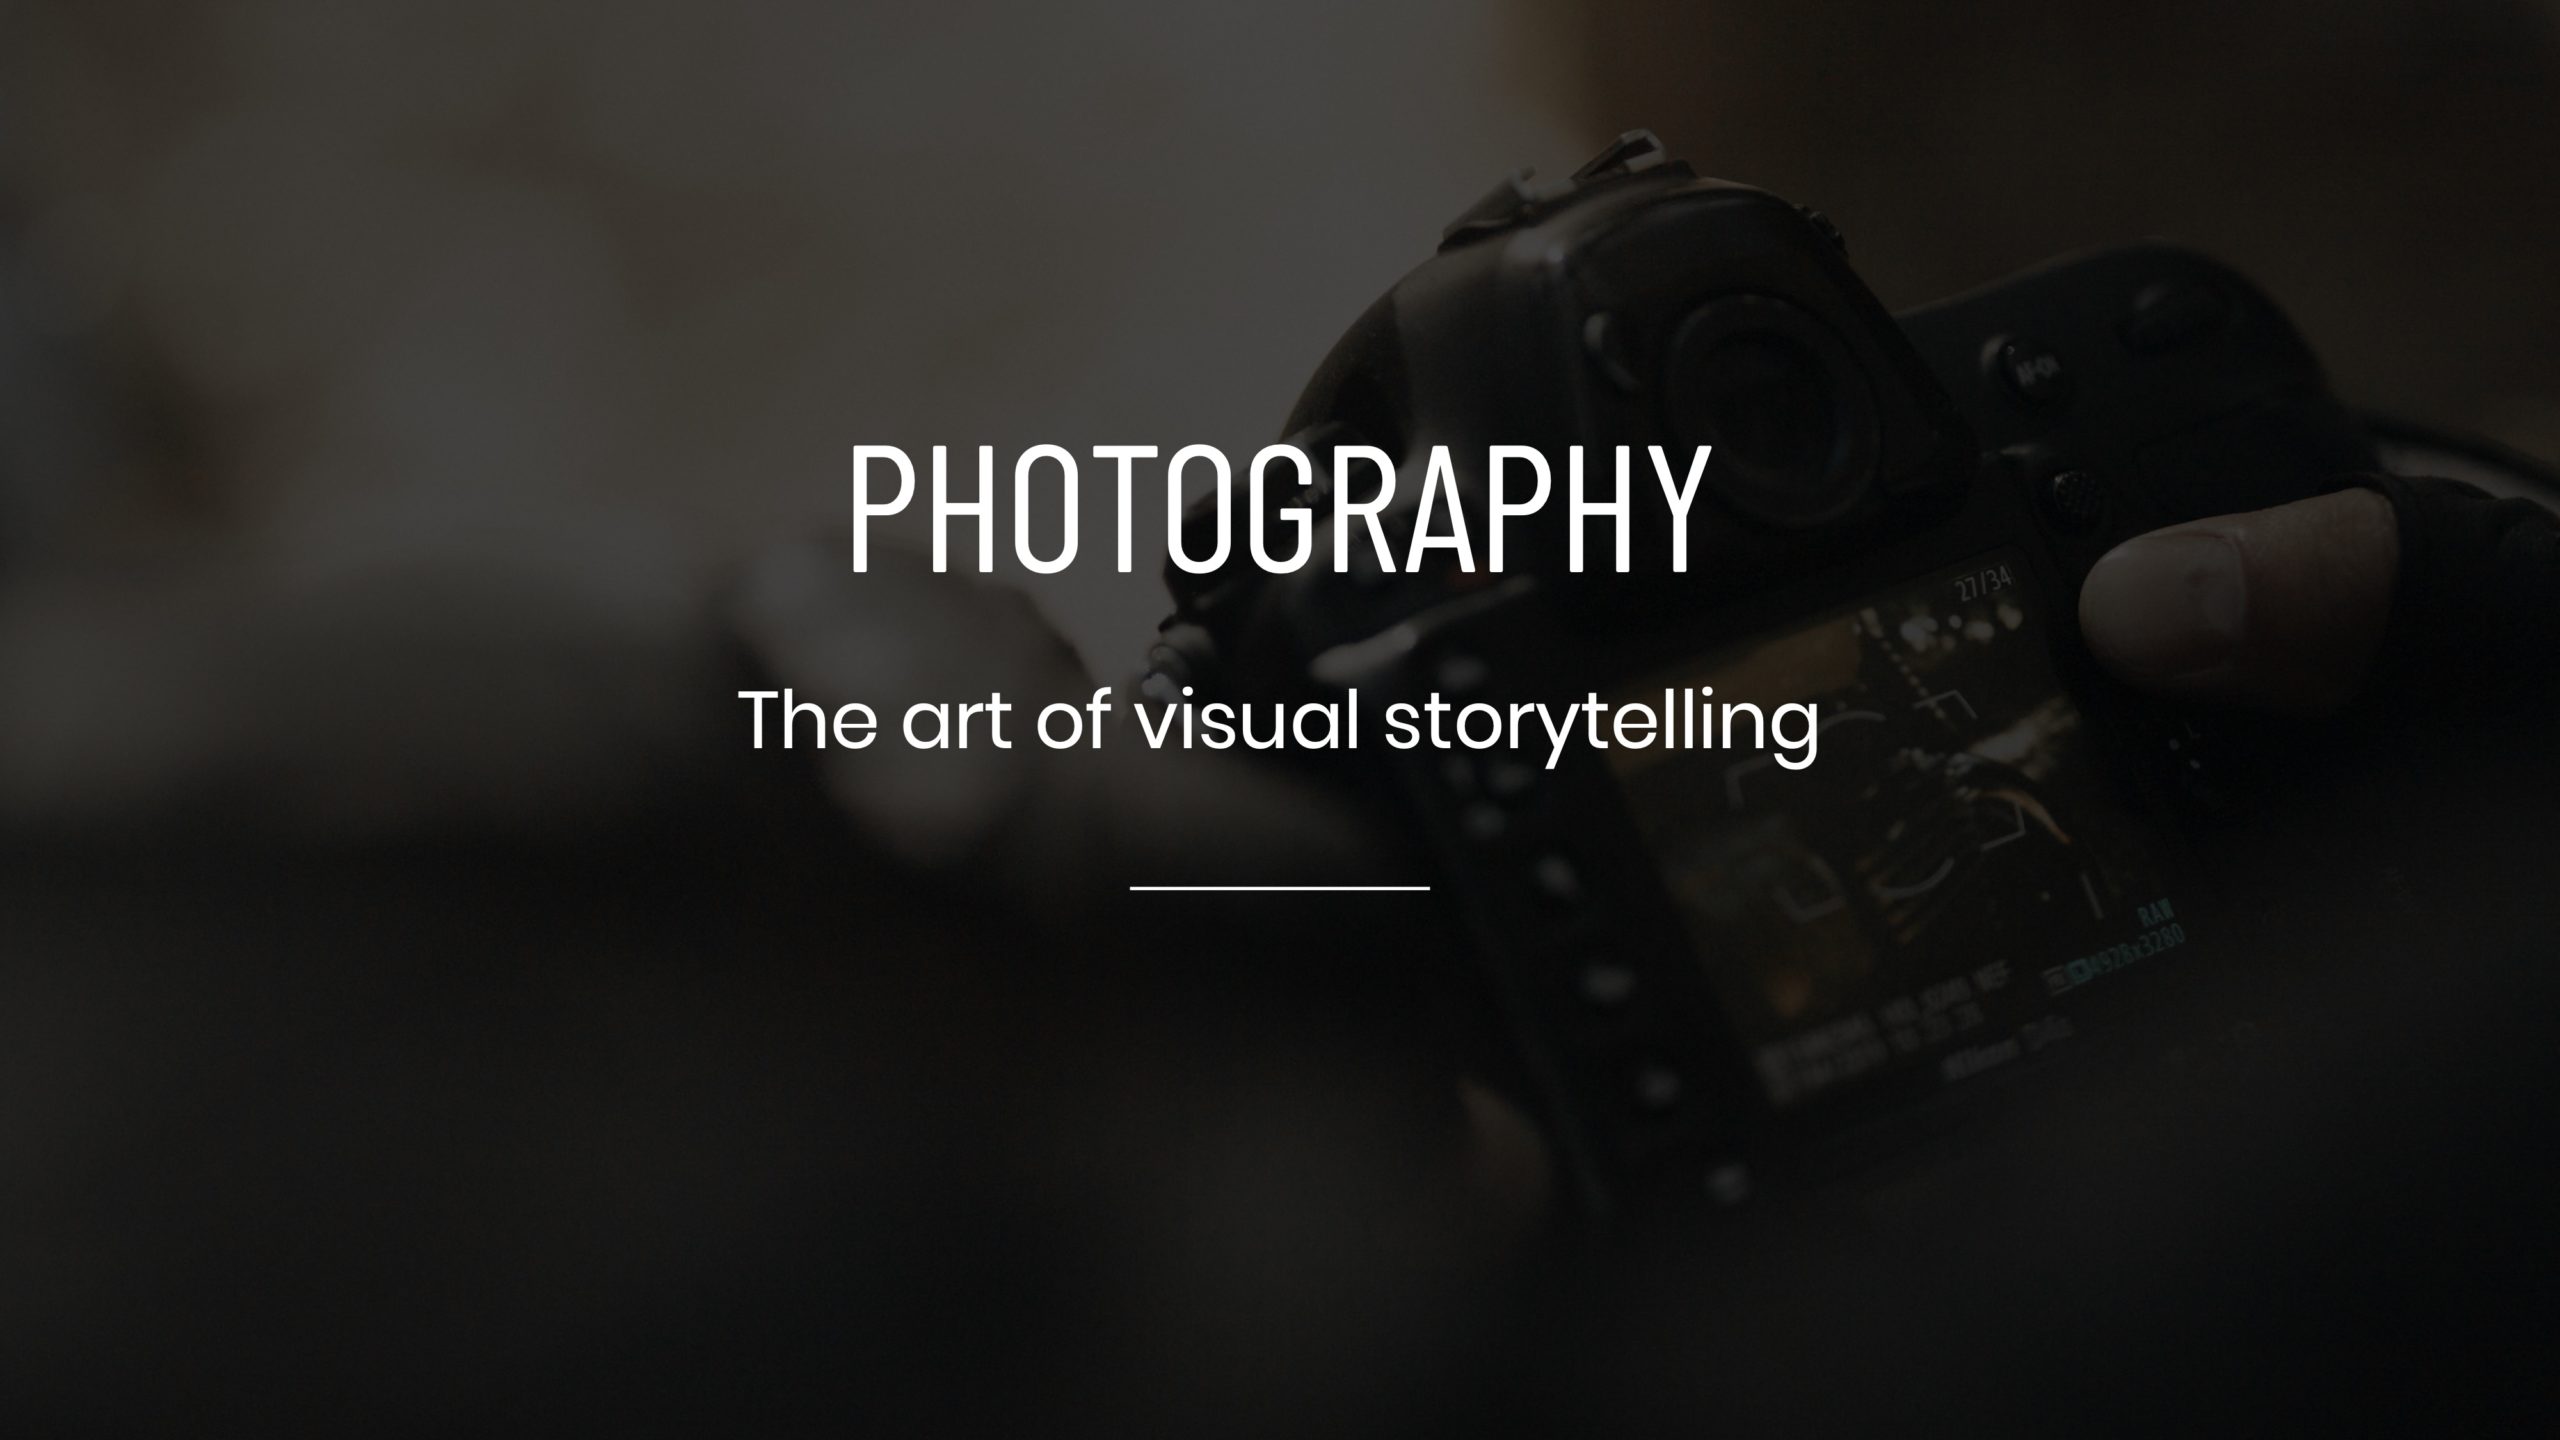 White Photography The Art of Visual Storytelling title Services Tile on dimmed background with closeup of a camera